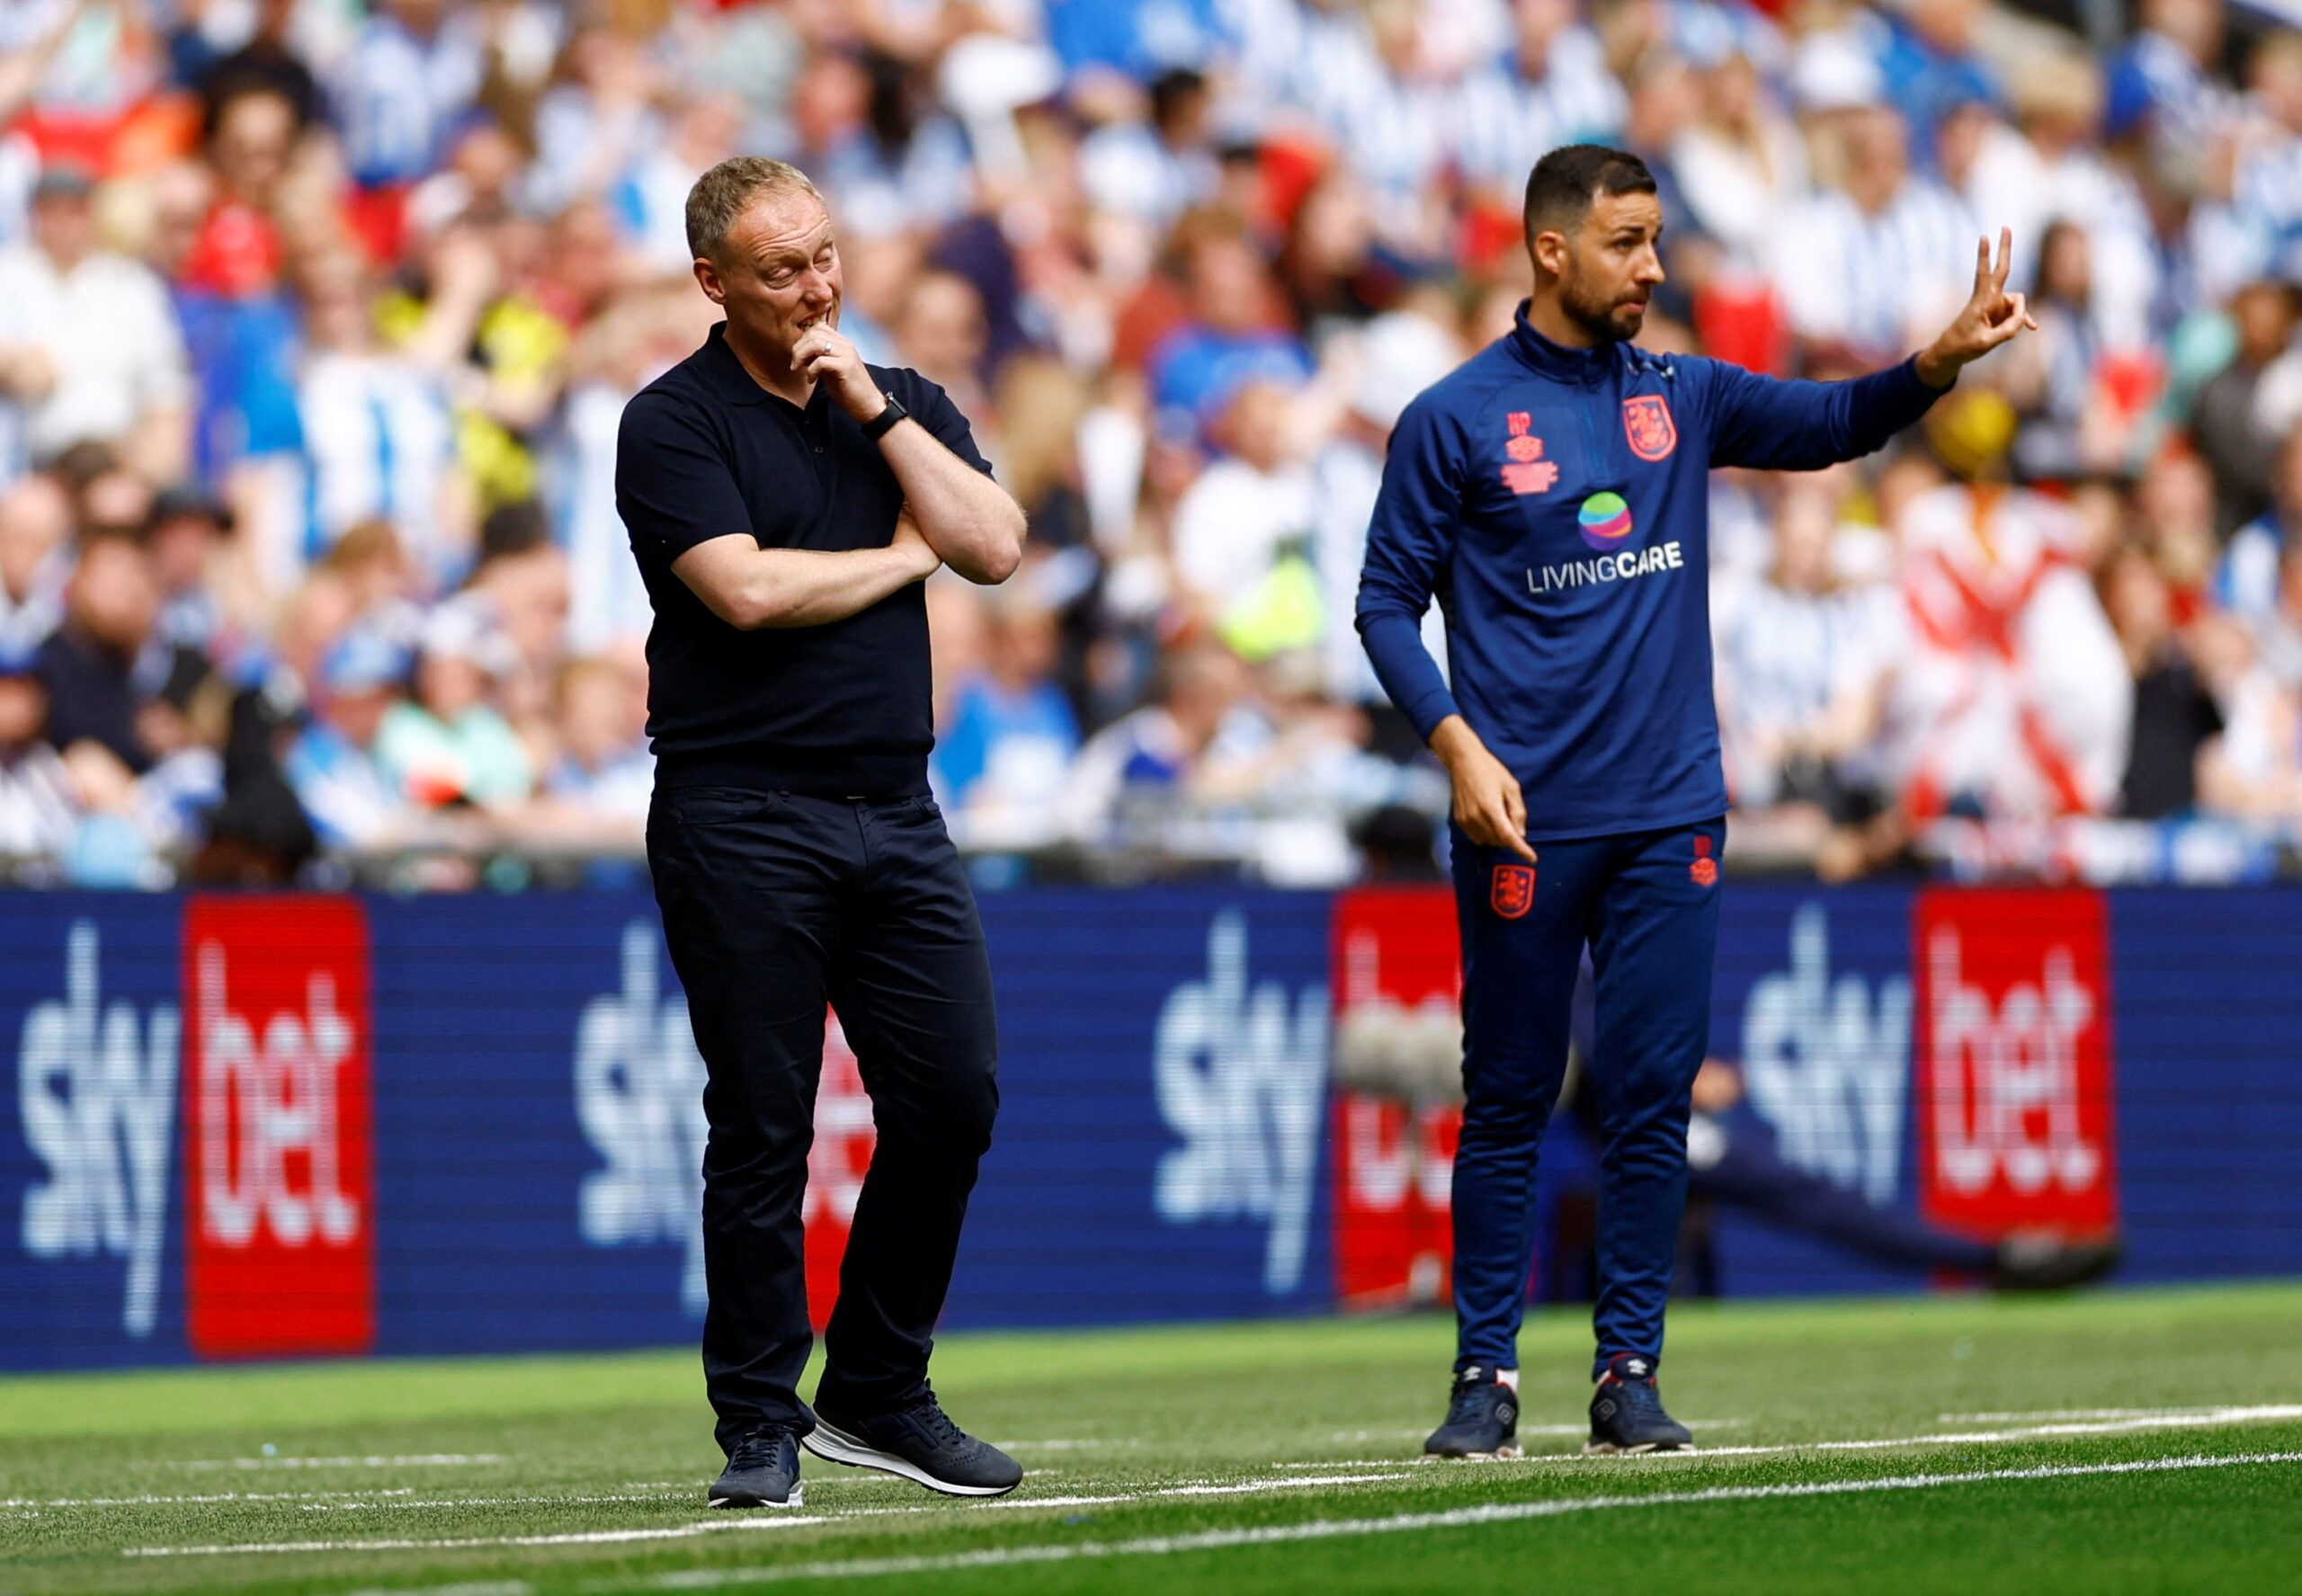 Soccer Football - Championship Play-Off Final - Huddersfield Town v Nottingham Forest - Wembley Stadium, London, Britain - May 29, 2022 Nottingham Forest manager Steve Cooper and Huddersfield Town assistant manager Narcis Pelach Action Images via Reuters/Andrew Boyers REFILE - CORRECTING ID